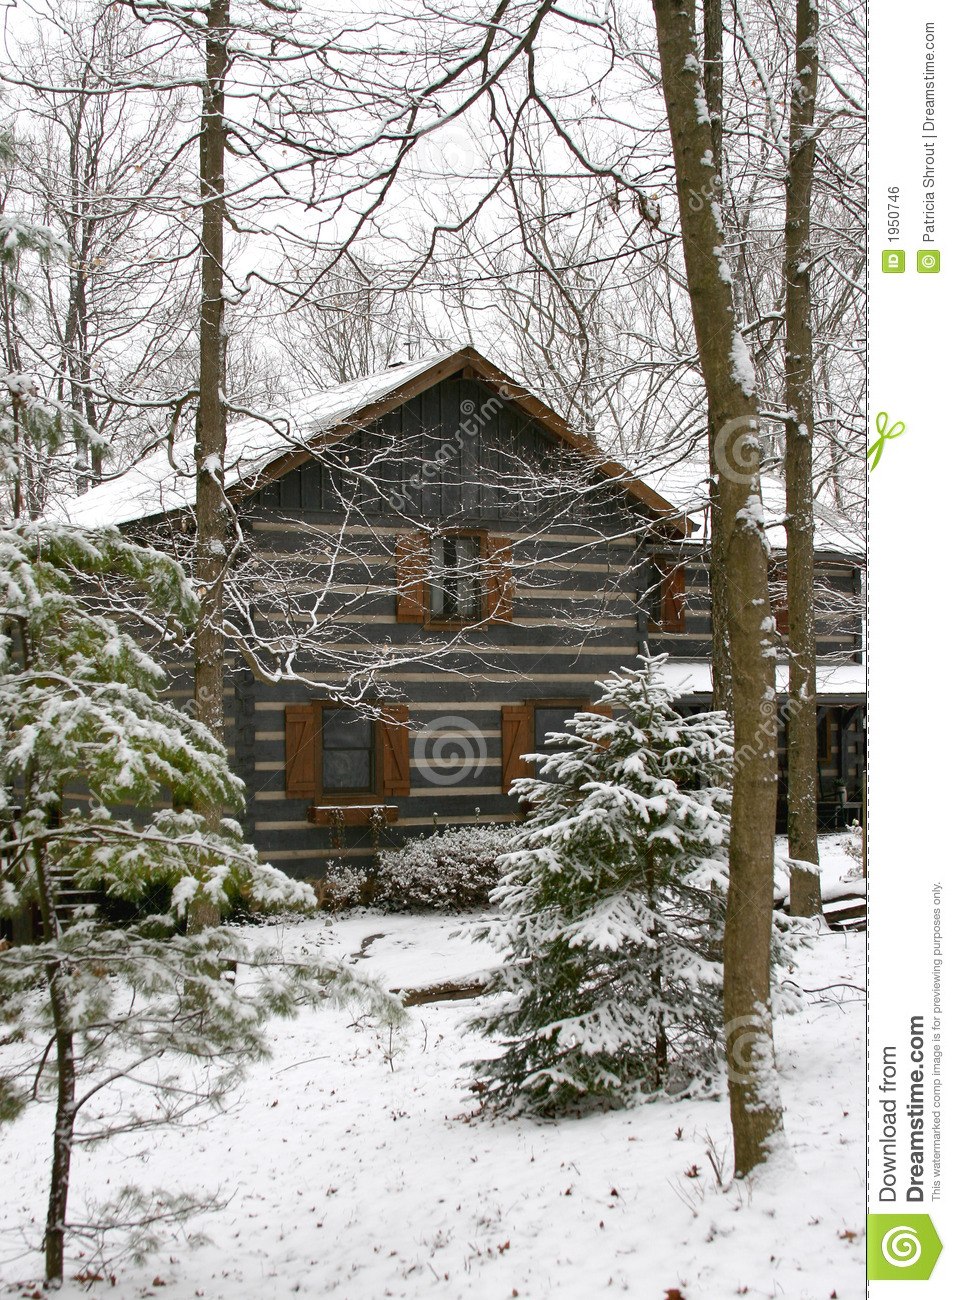 Log Cabin In A Snow Covered Wooded Area